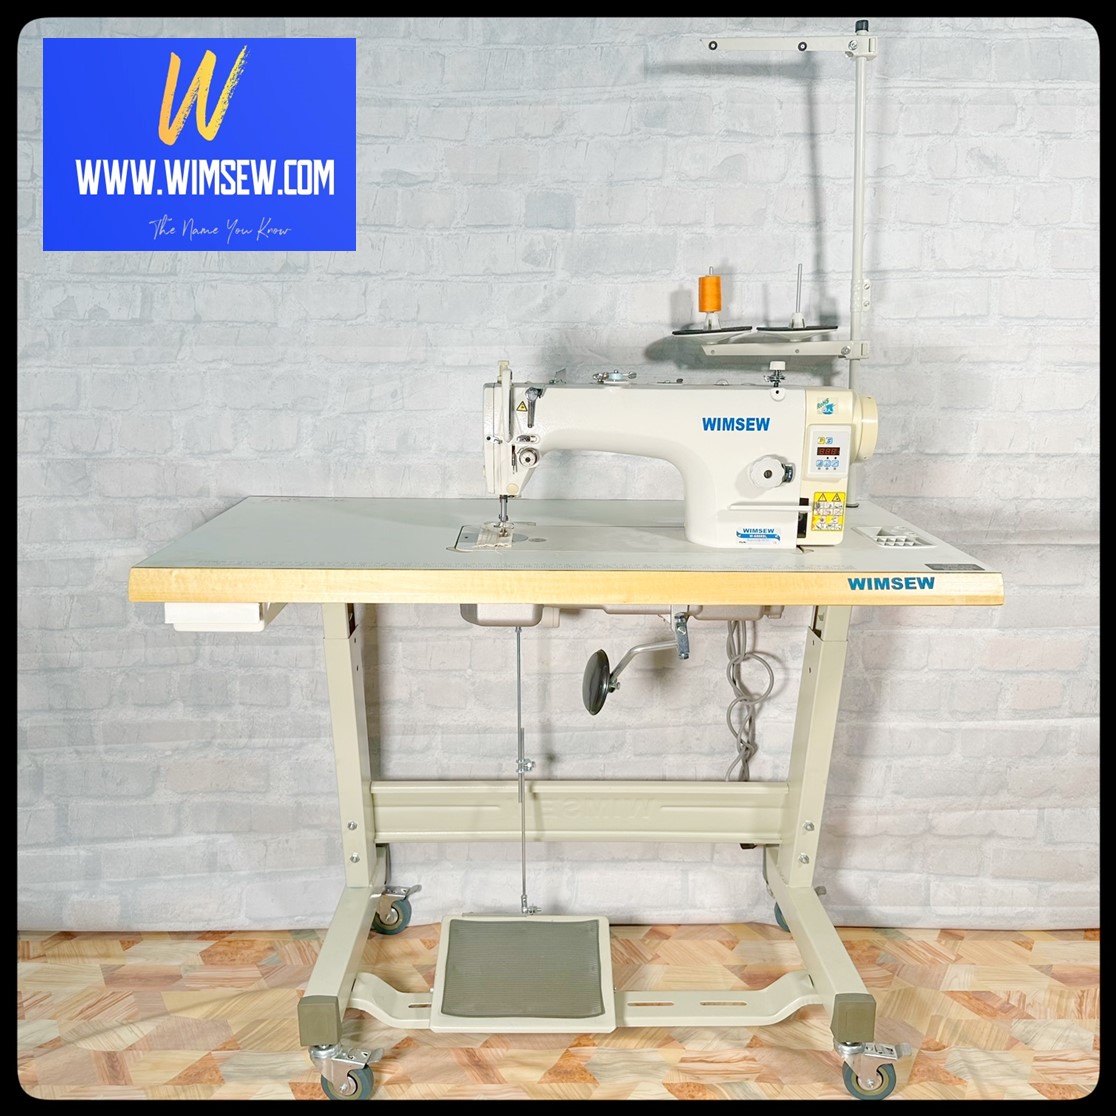 WIMSEW 6900 Sewliner 2 ED (Wheel Stand)  - <span style='color: #ff0000;'>Call now for more information. 020 8767 0036 - choose option 3</span>